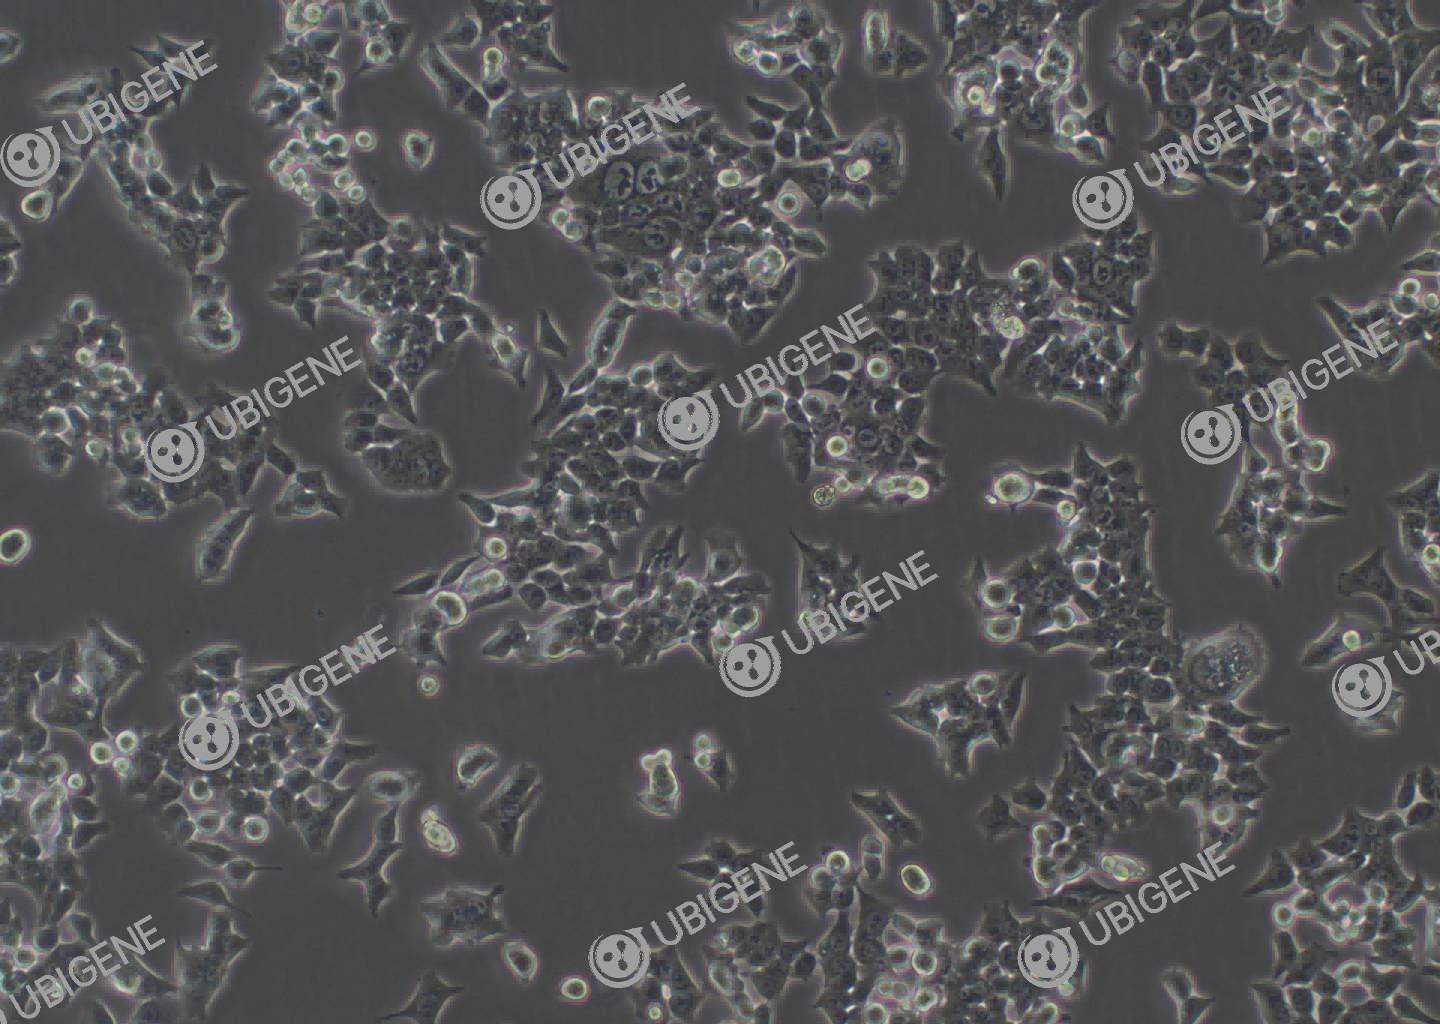 HCT 116 cell line Cultured cell morphology